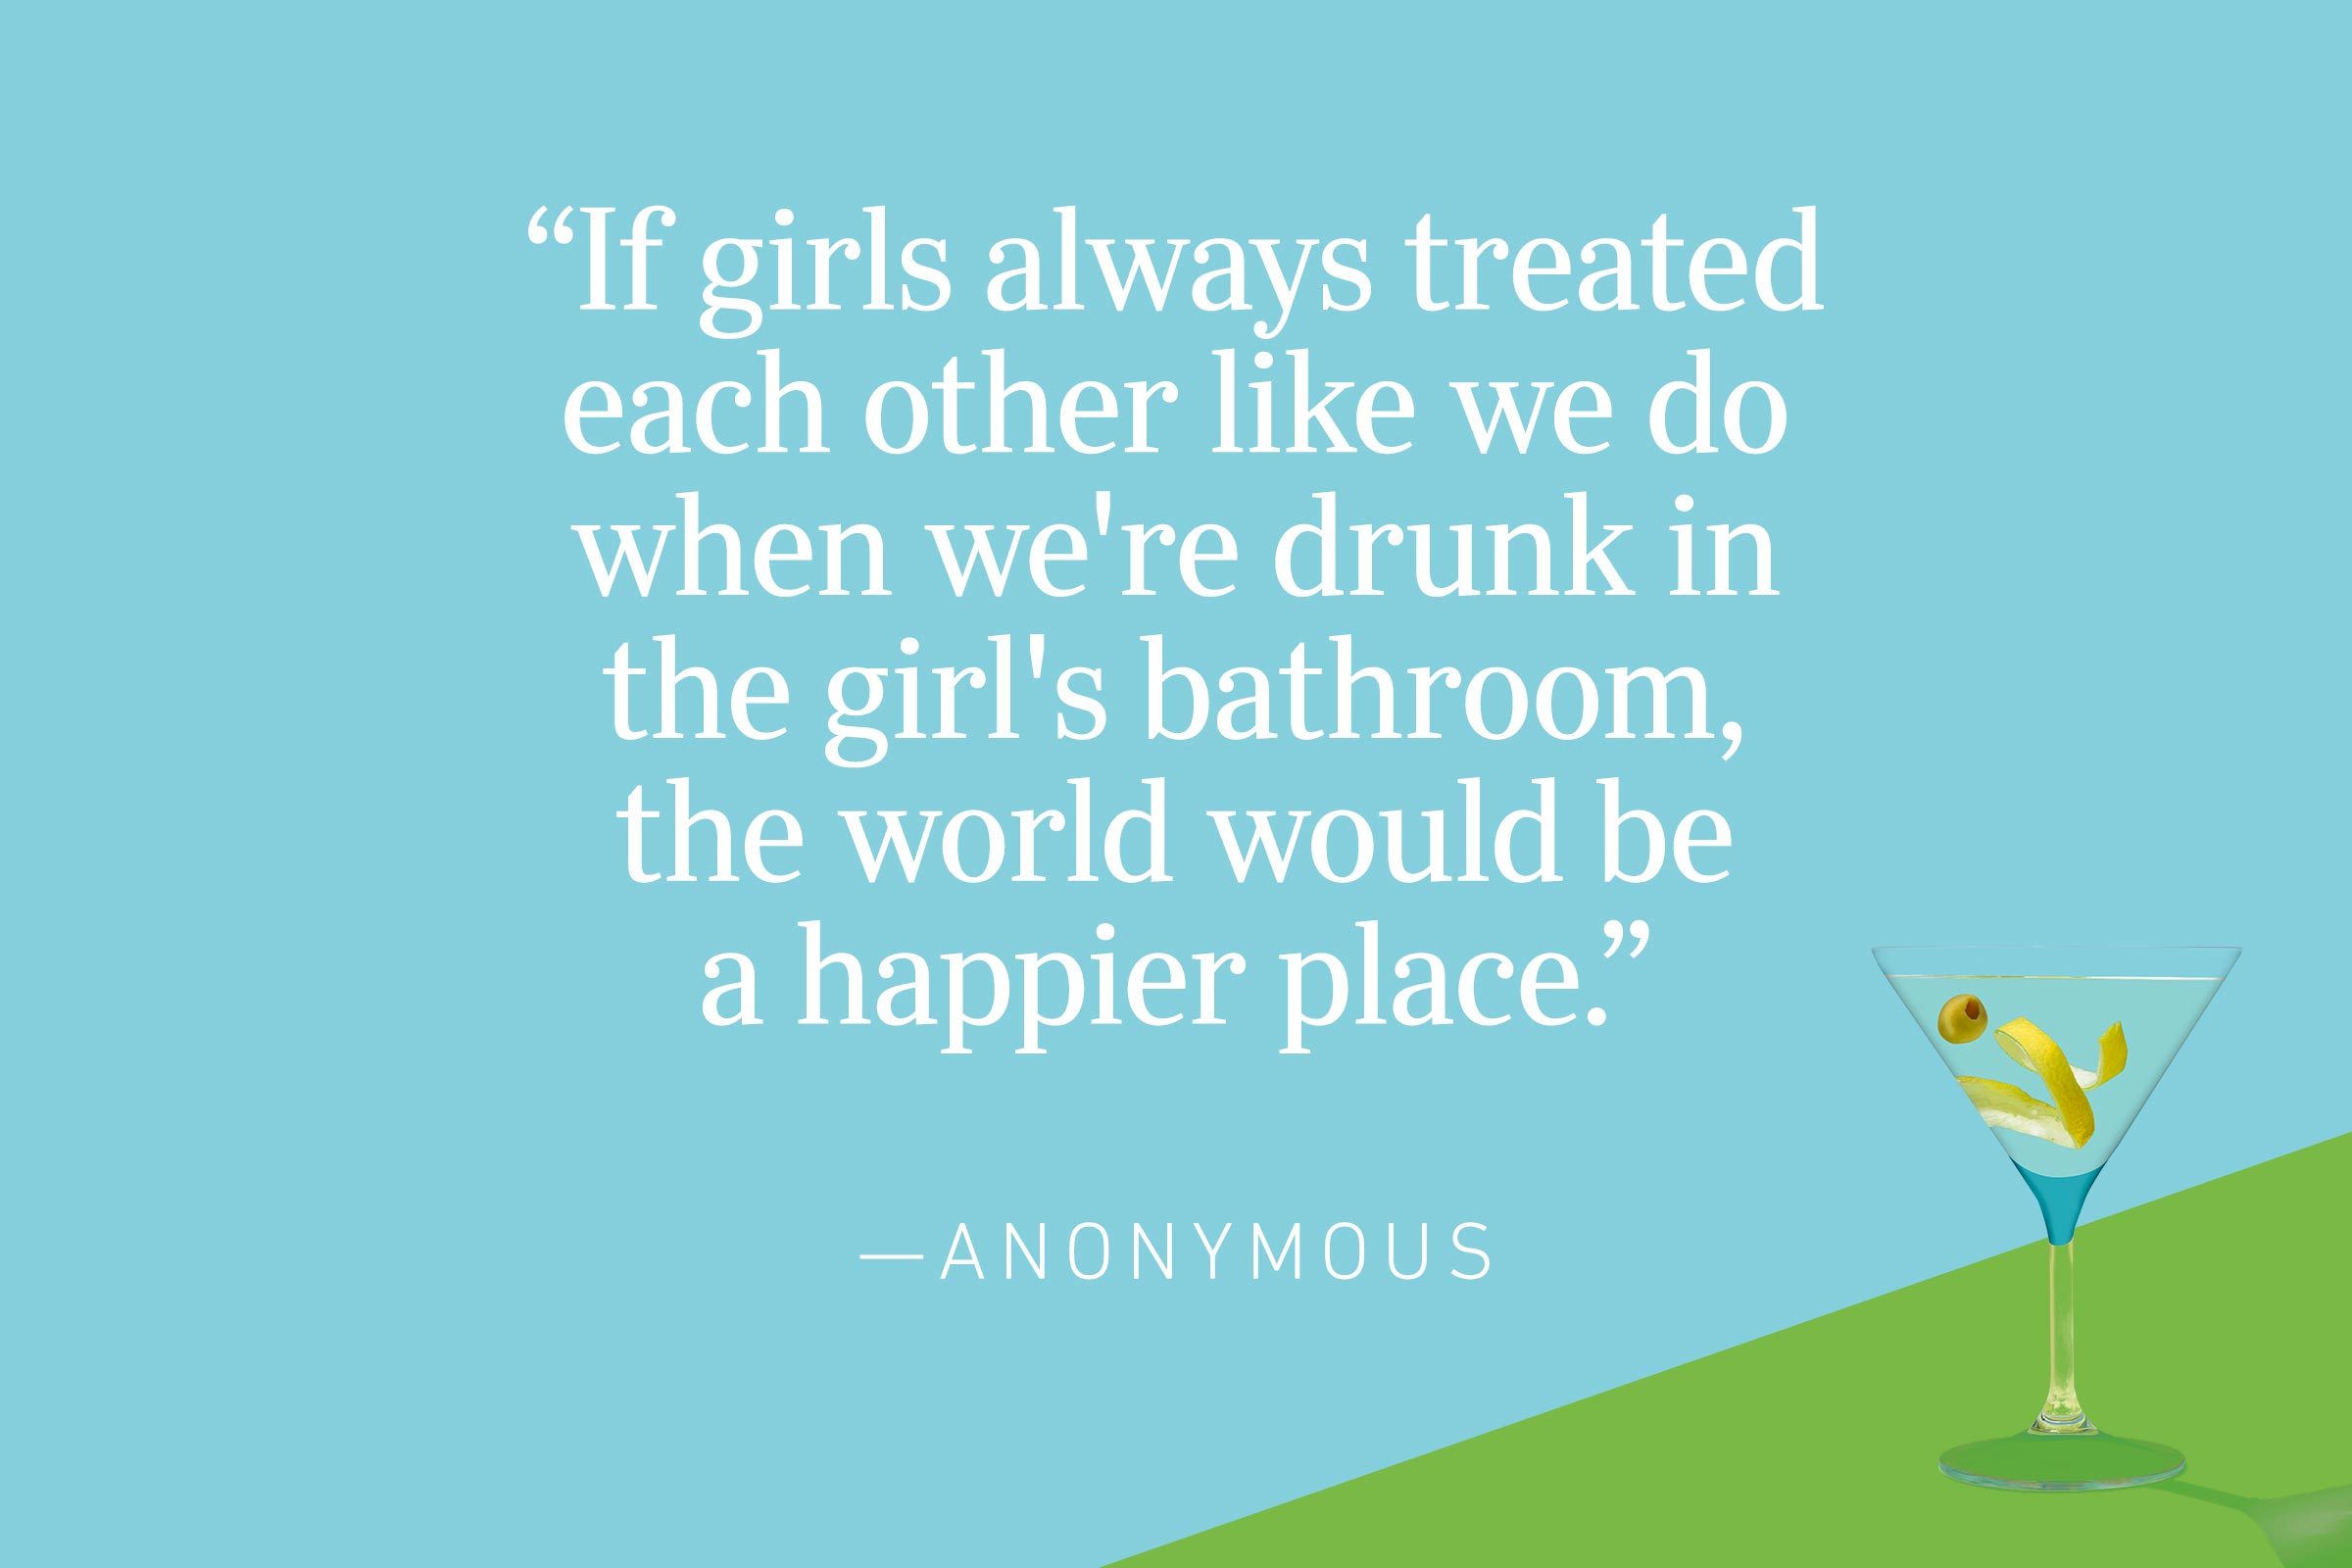 "If girls always treated each other like we do when we're drunk in the girl's bathroom, the world would be a happier place." —Anonymous